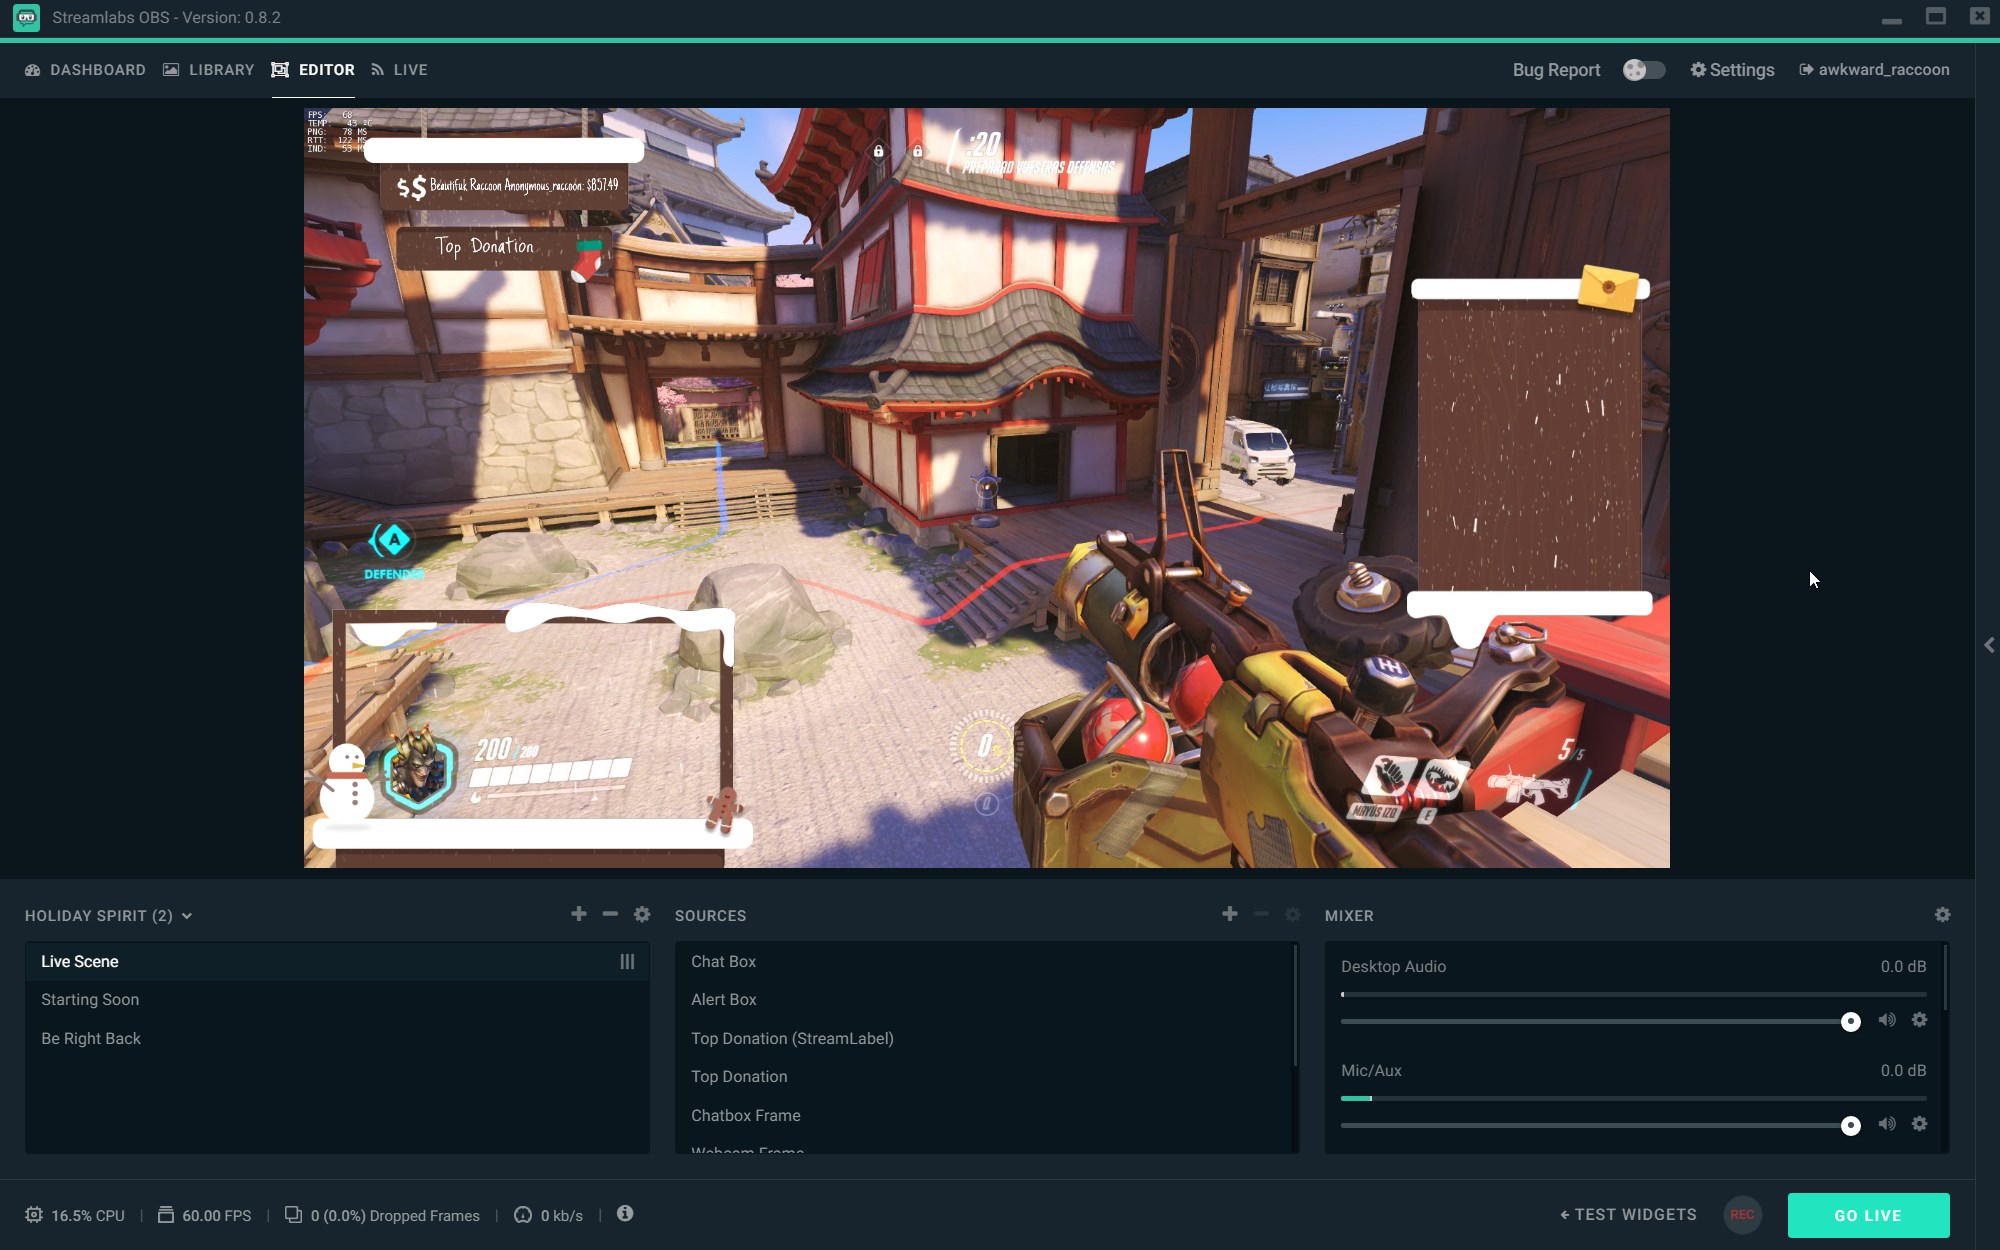 Streamlabs obs wont capture game